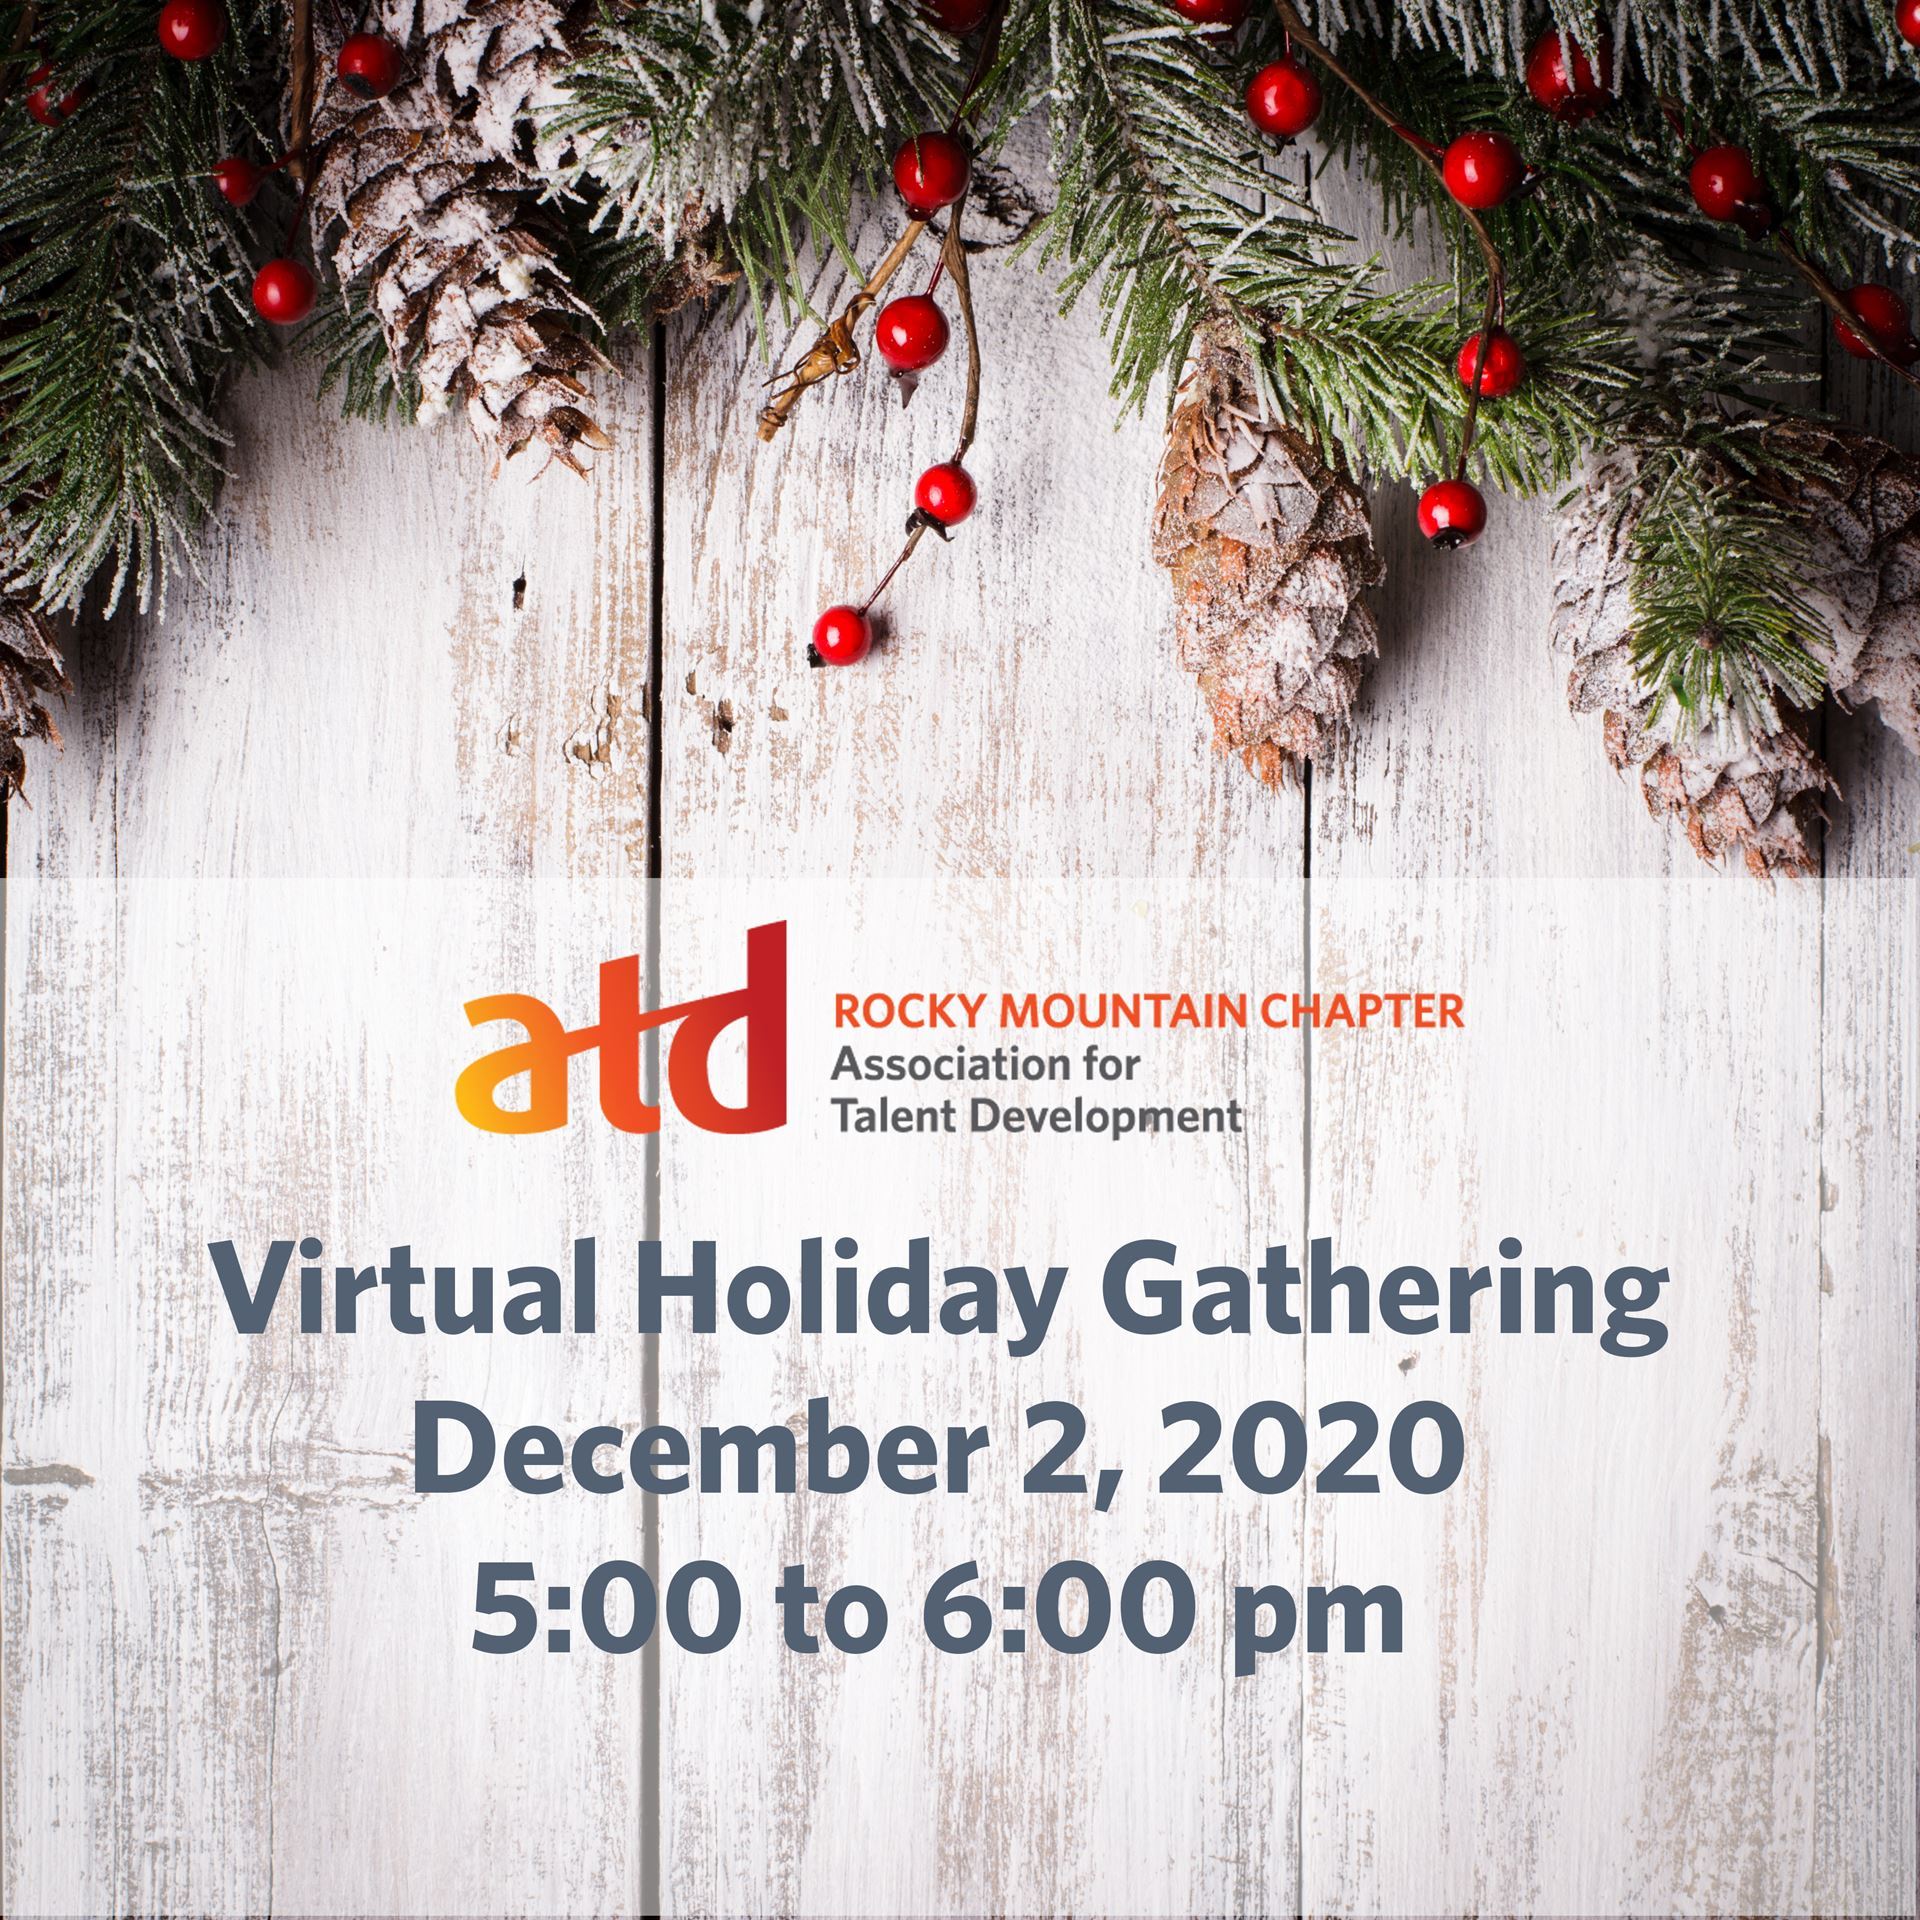 Holiday background with holly, pinecones and pine branches. ATD Rocky Mountain Chapter logo and text Virtual Holiday Gathering December 2 2020 5 to 6 pm